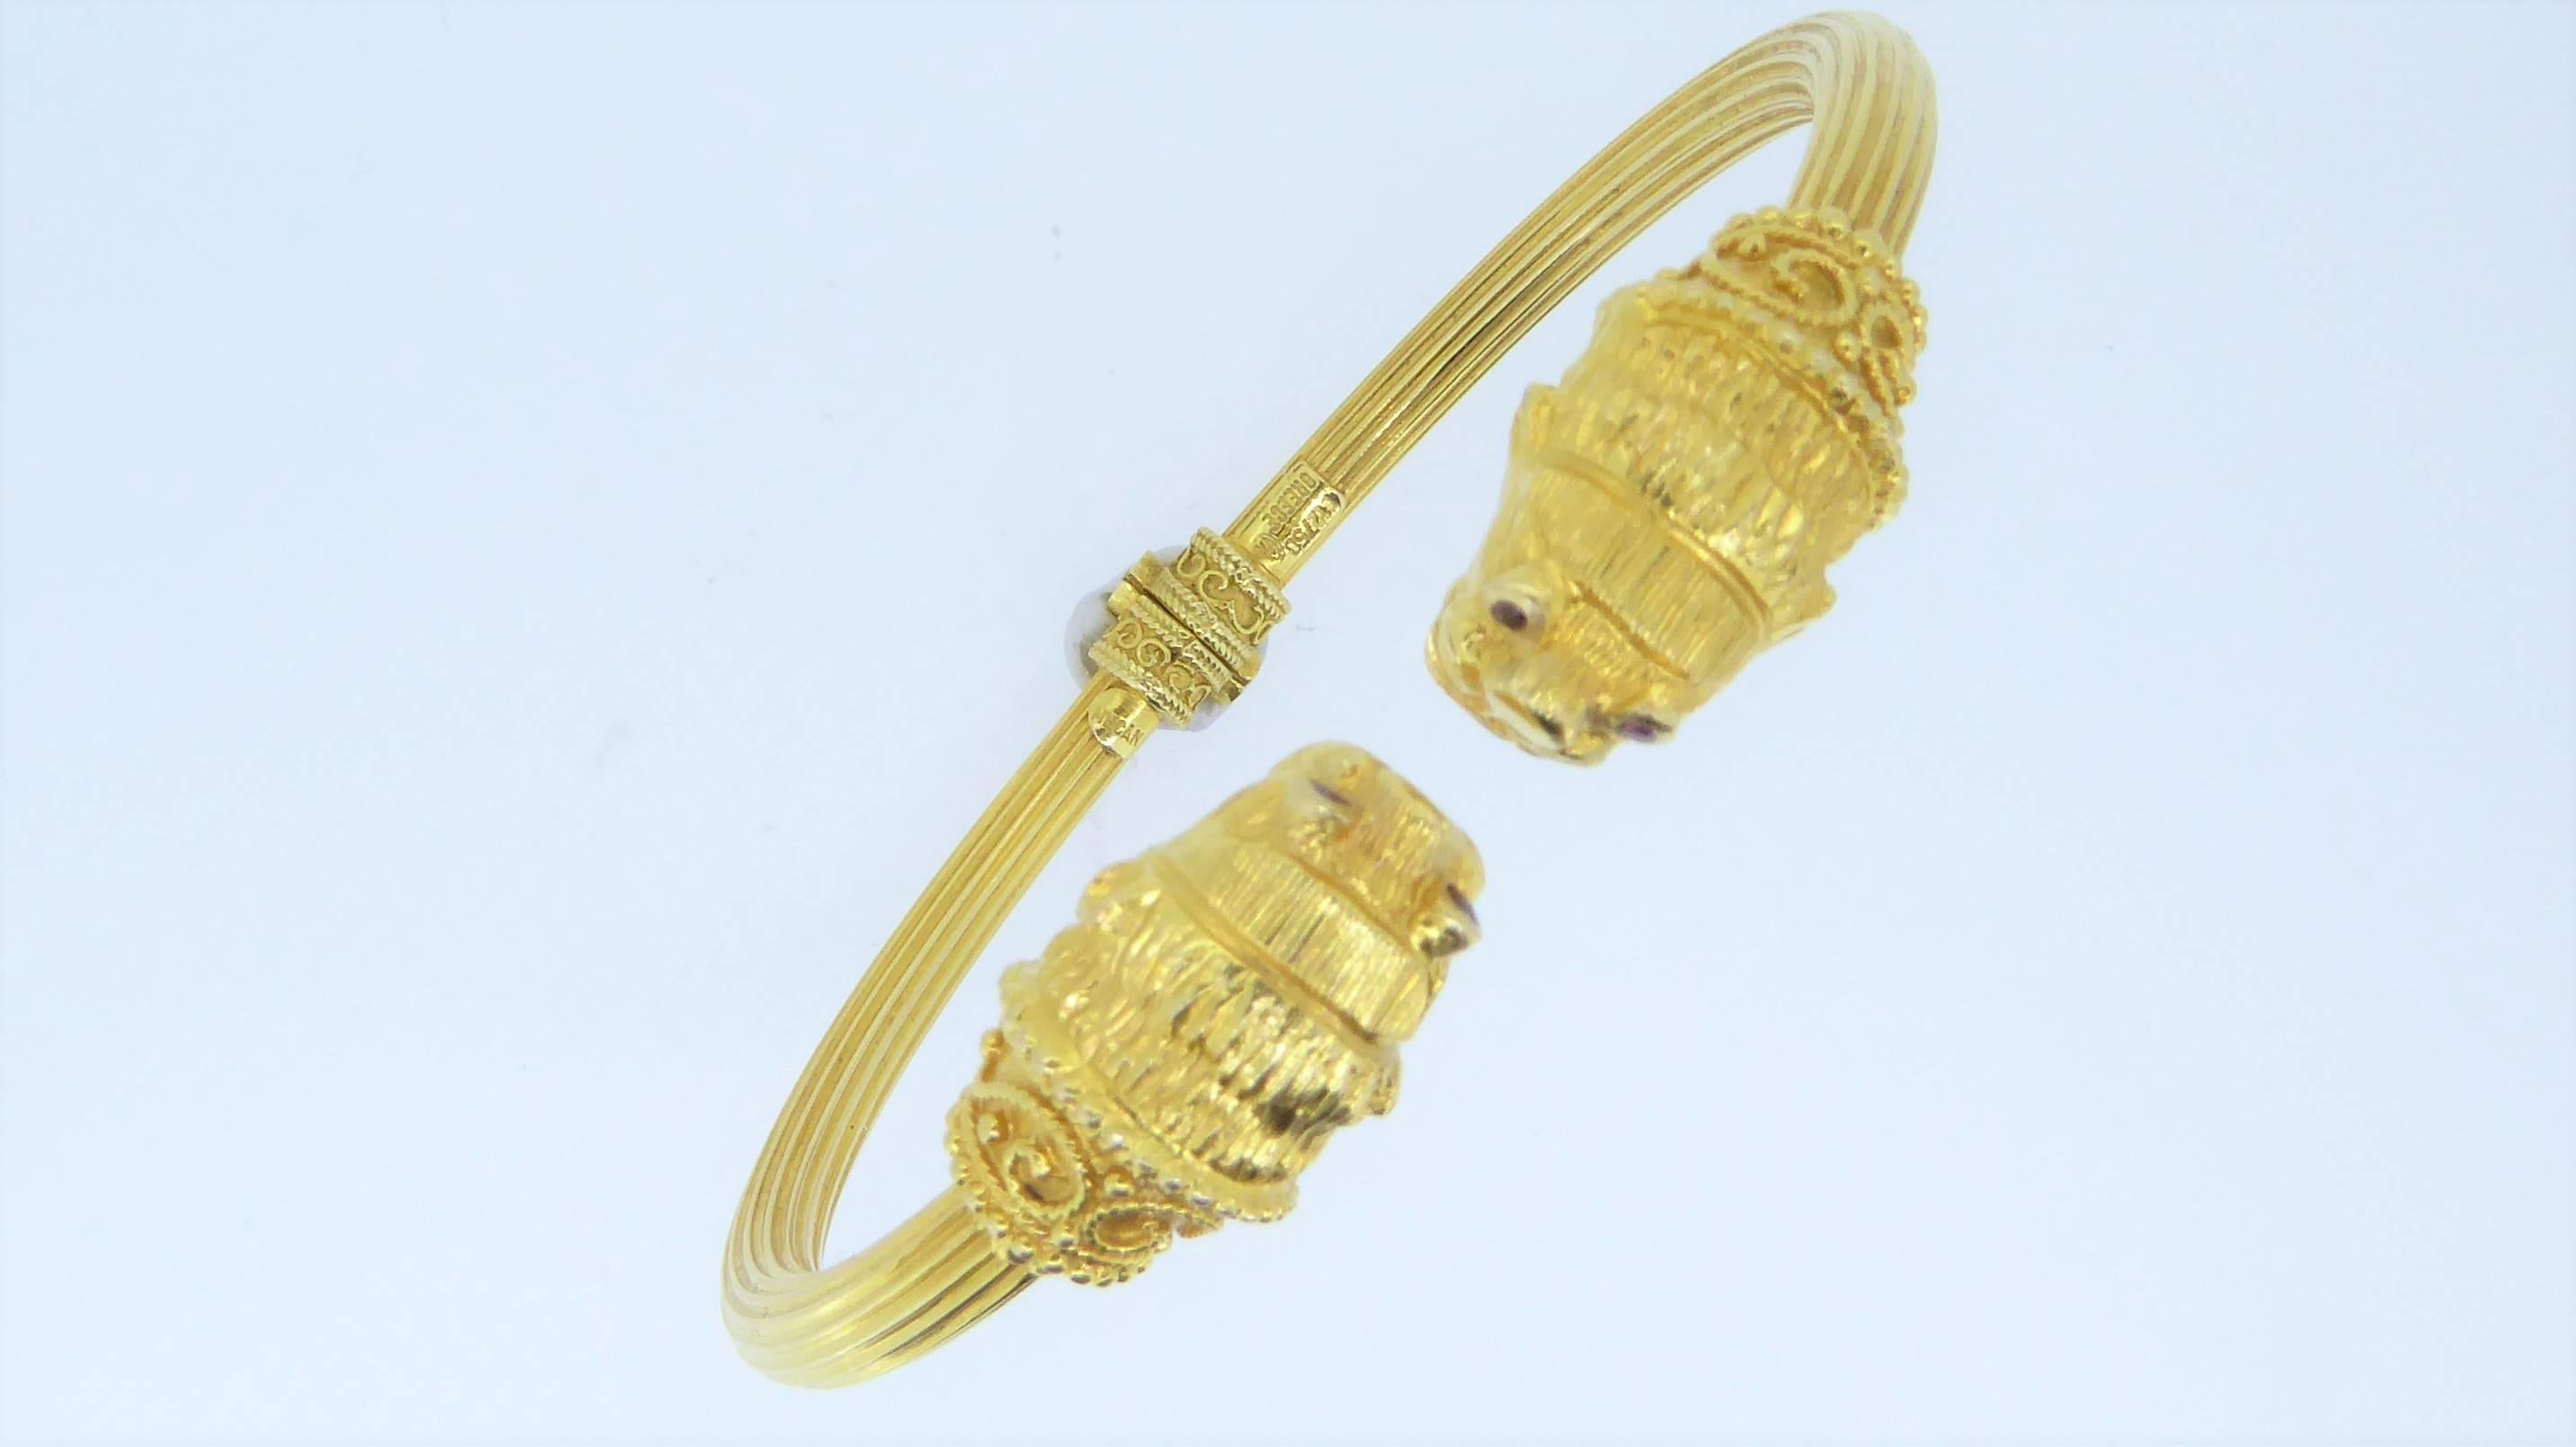 A Lalaounis 18 Carat Yellow Gold Double-Headed Lion Bangle. The hinged, reeded bangle with lion-head terminals and reuby-set eyes. Circa 1980. Stamped 